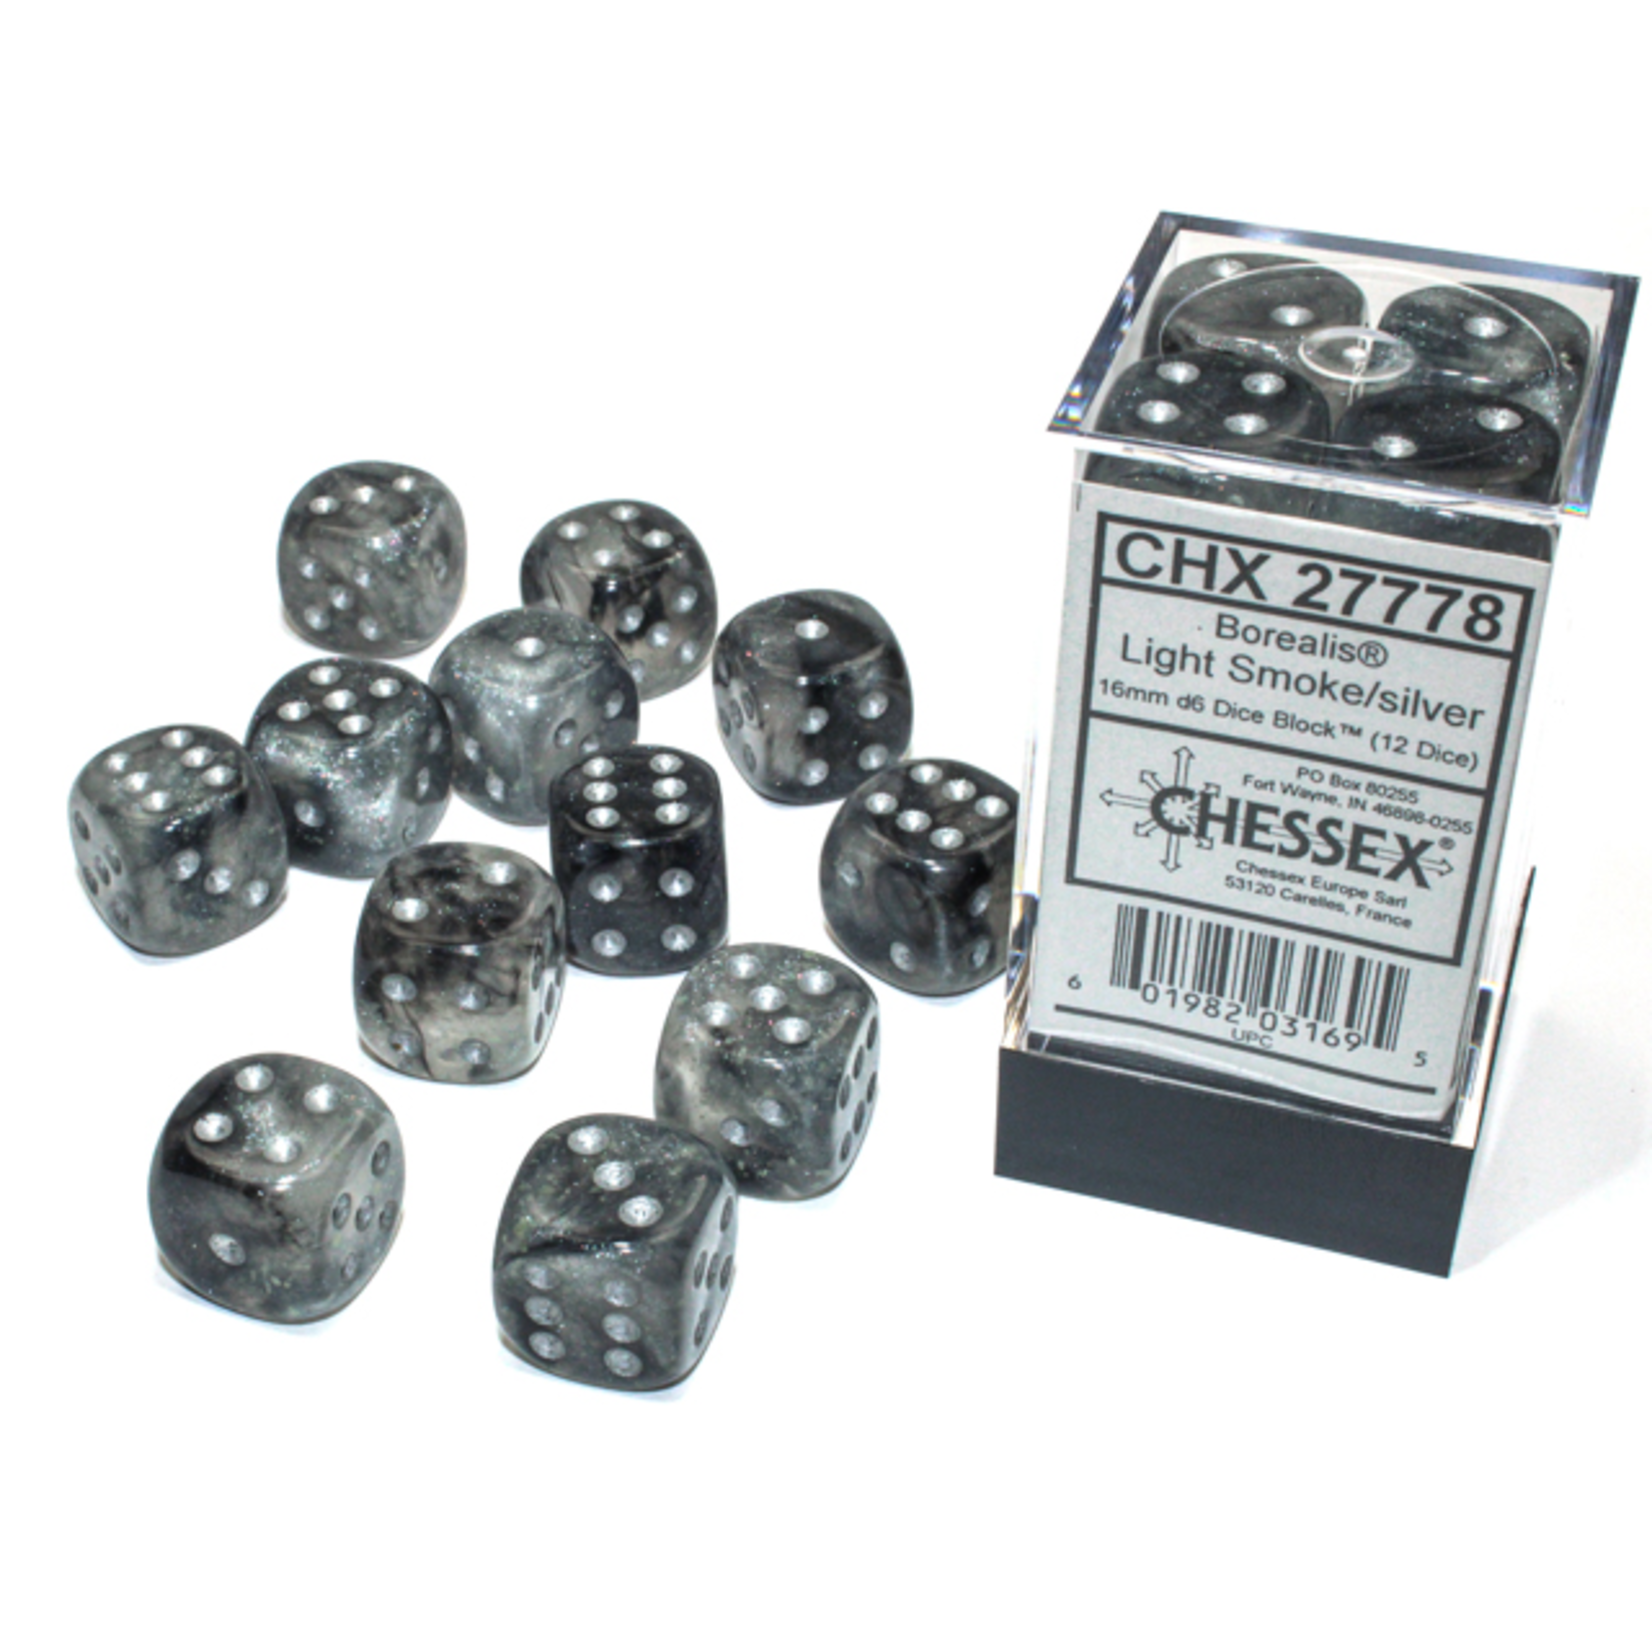 Chessex 12-Piece Dice Set: Borealis Luminary Light Smoke with Silver Pips (16mm, D6s Only)